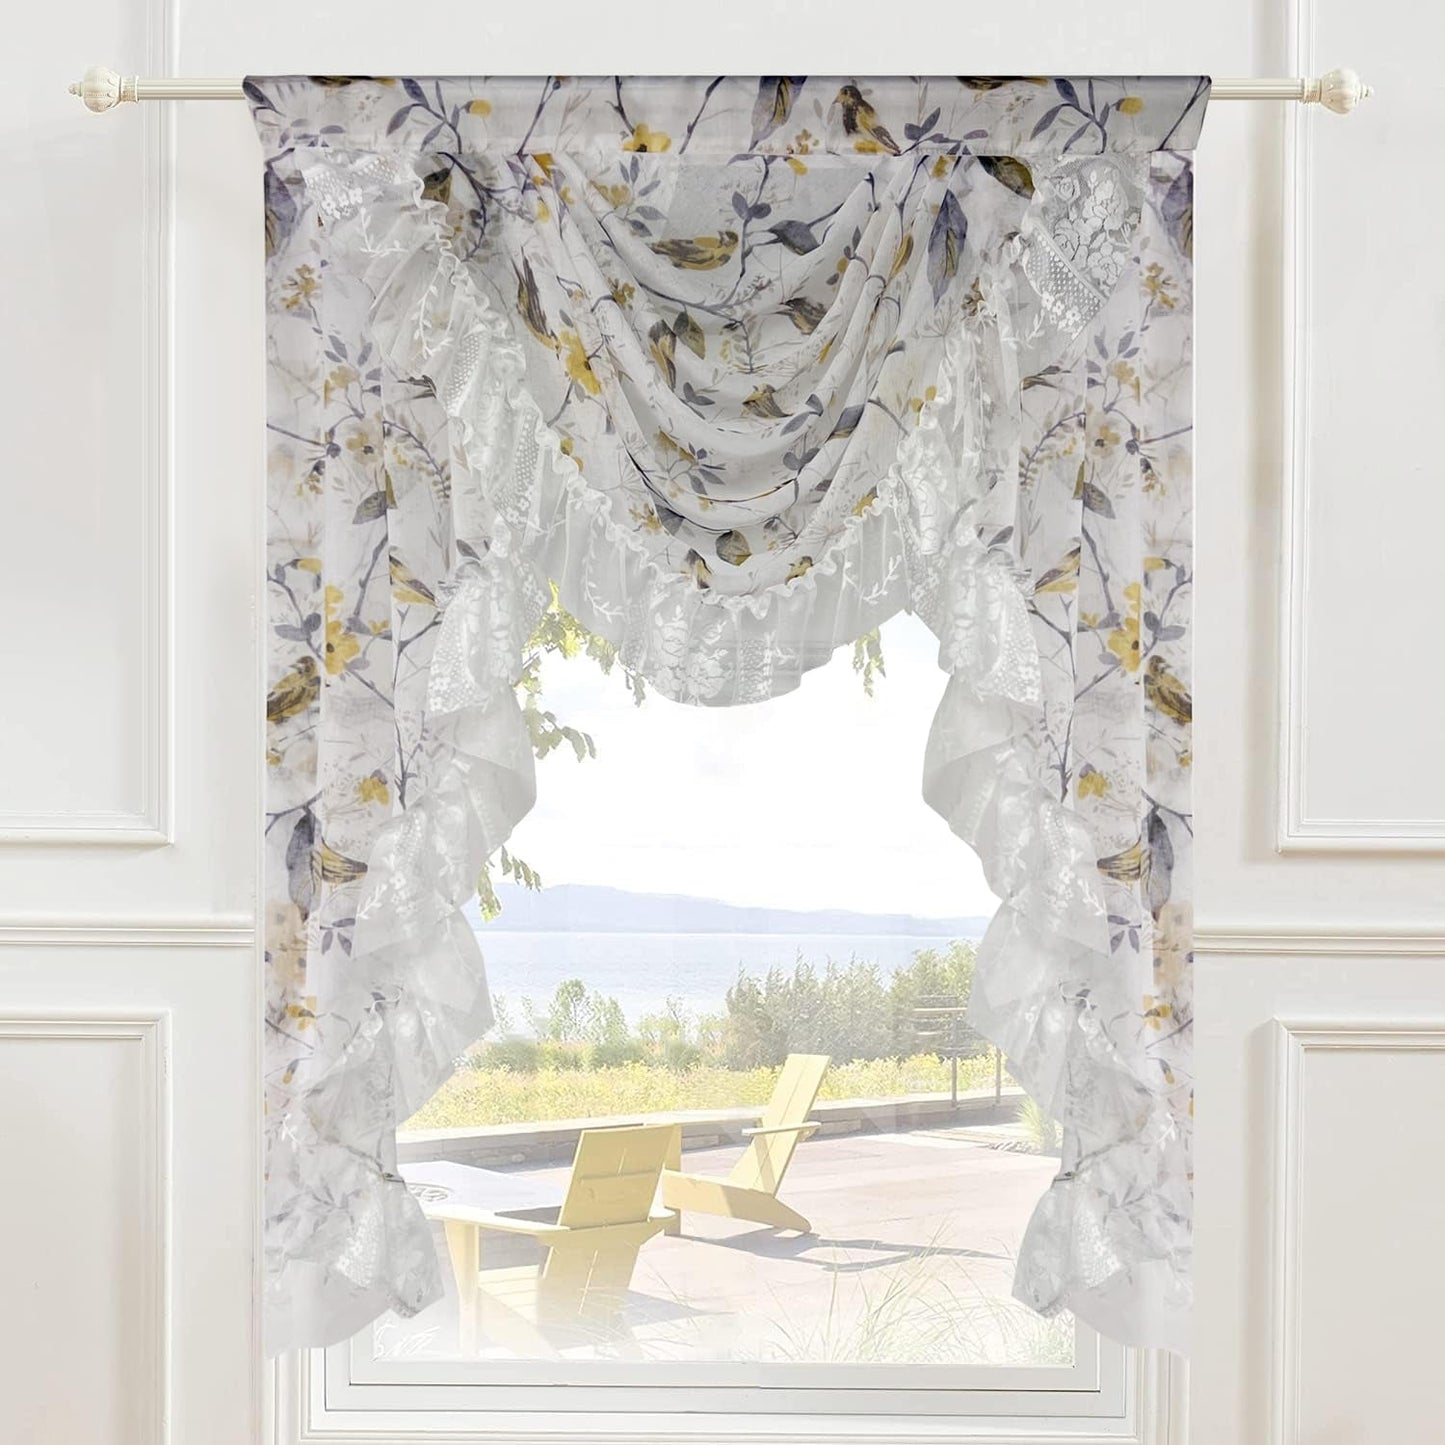 Elegant Floral Sheer Swag Valance with Lace Ruffles Luxury Beige Printed Sheer Valance for Living Room Bedroom Rod Pocket Top 1 Panel (Beige,W118 Inch)